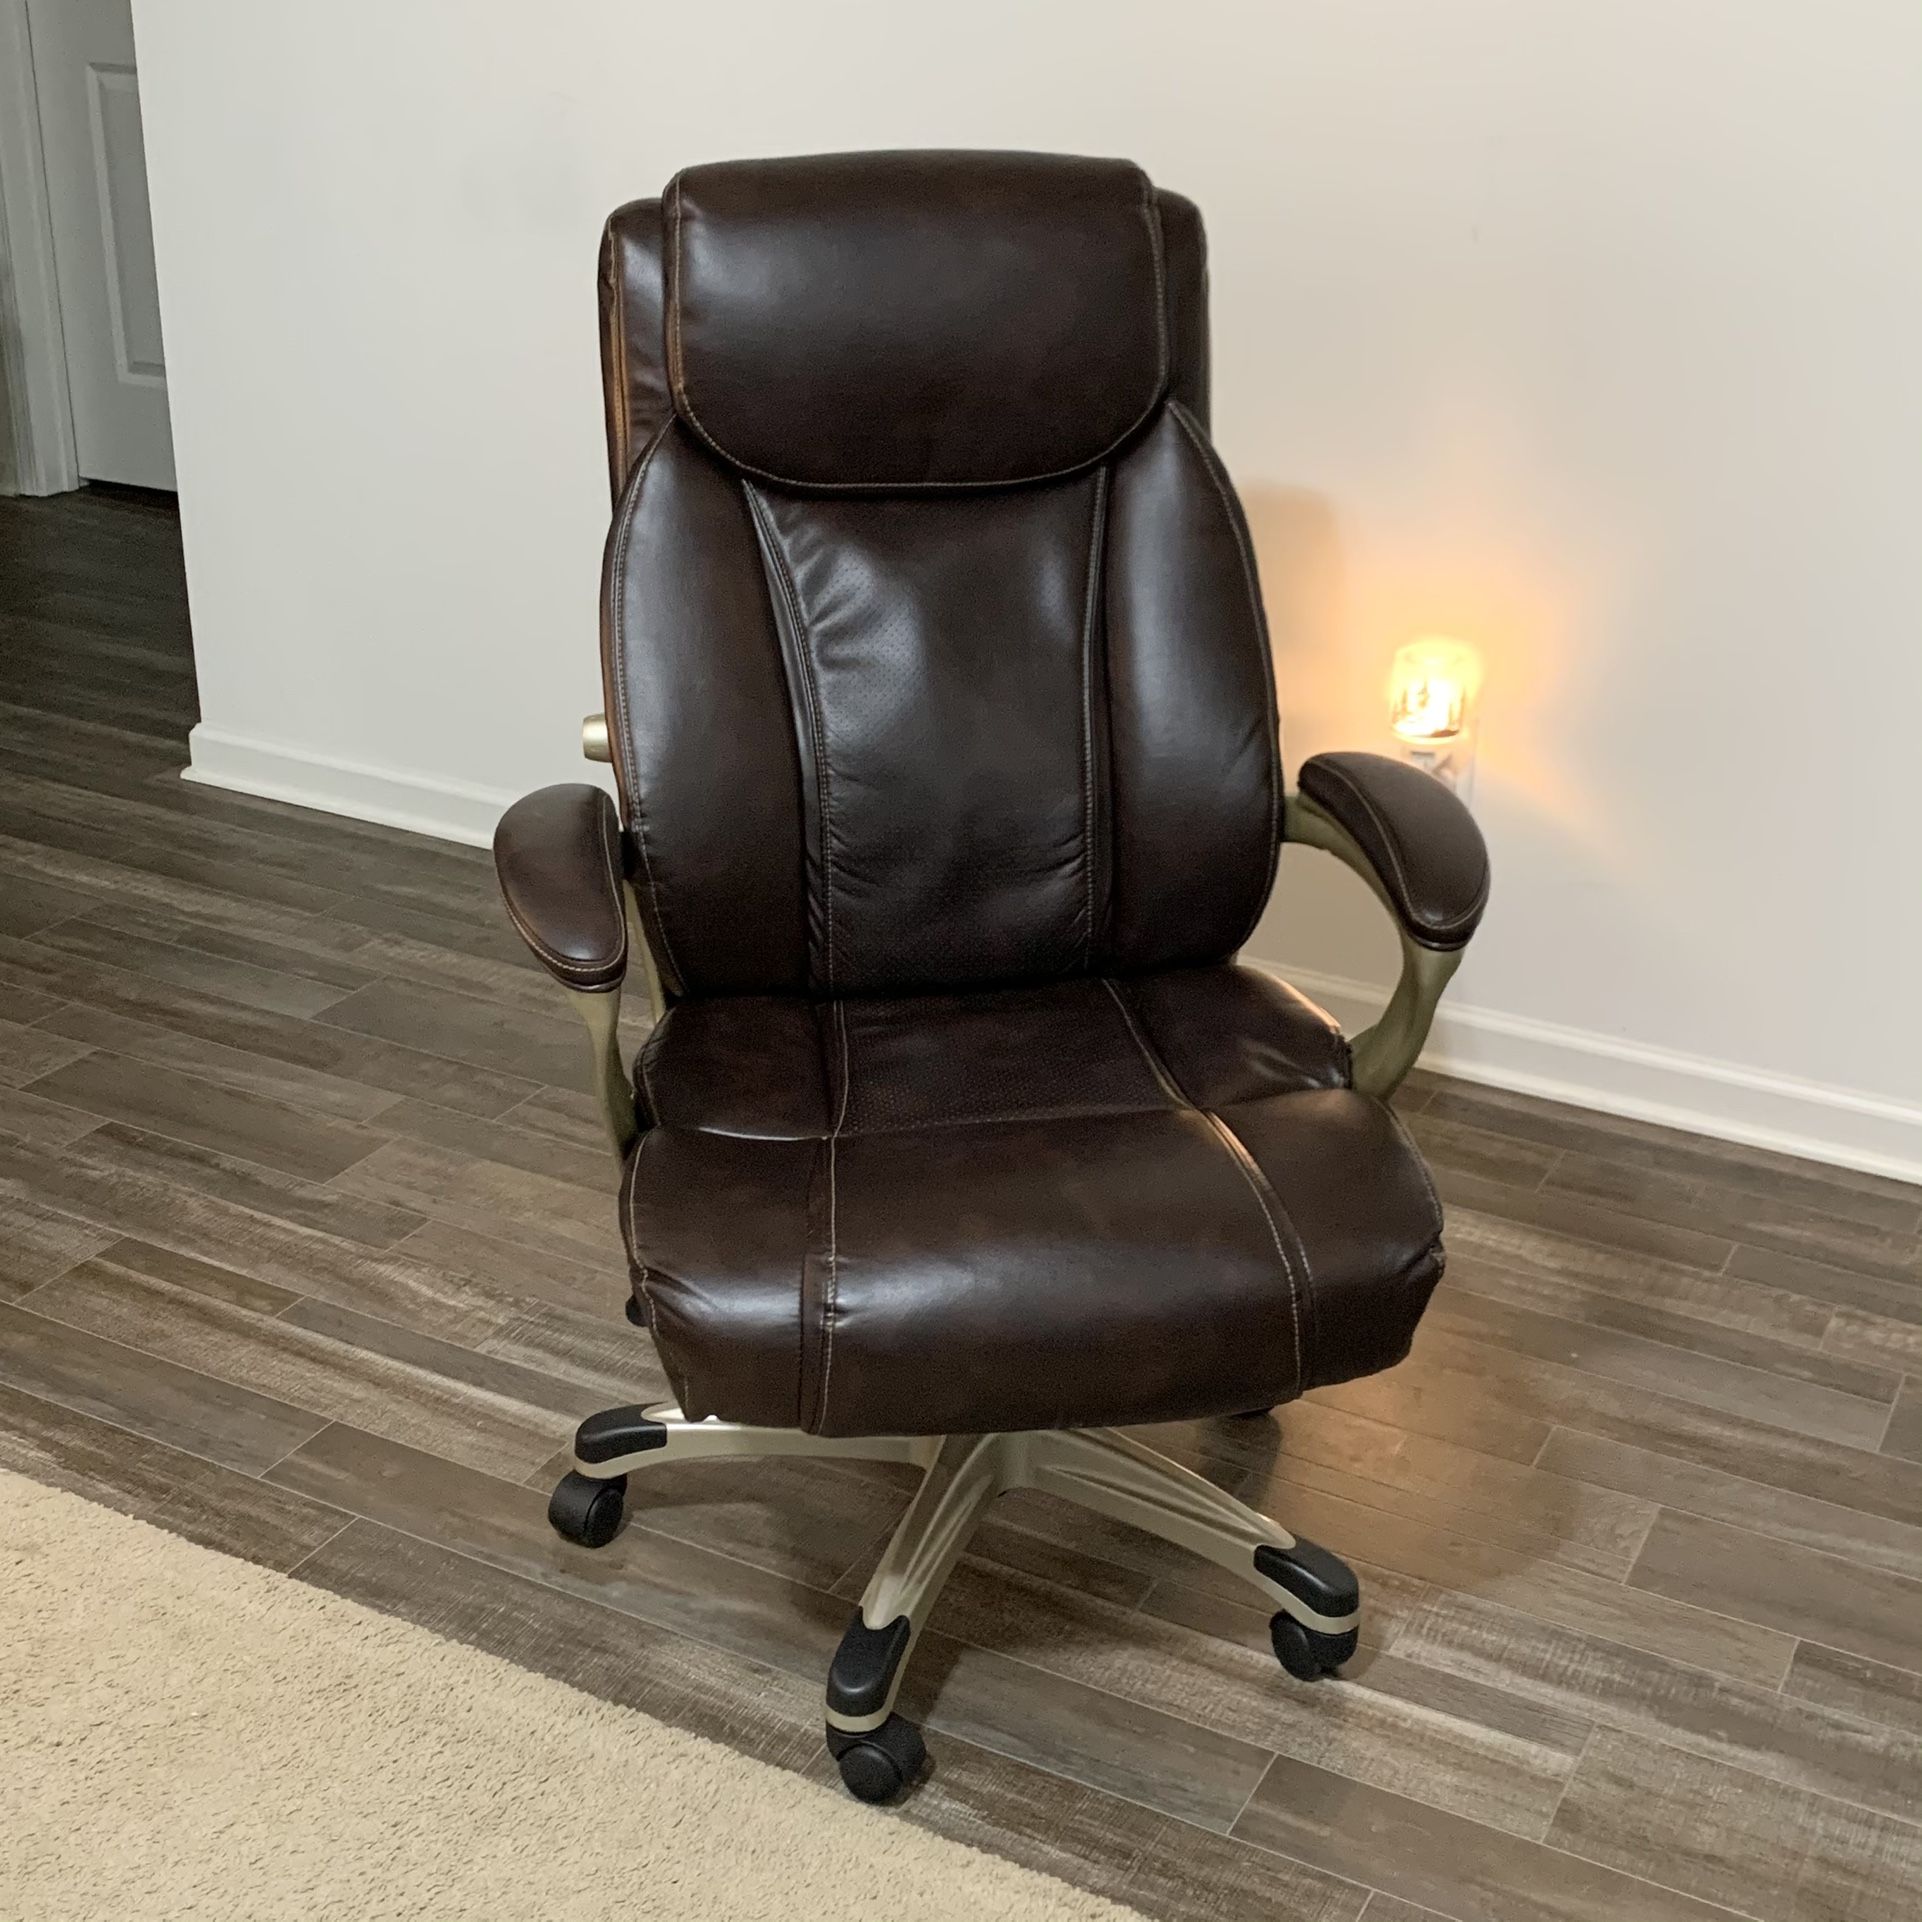 [Used] AmazonBasics Big & Tall Executive Computer Desk Chair, Brown with Pewter Finish